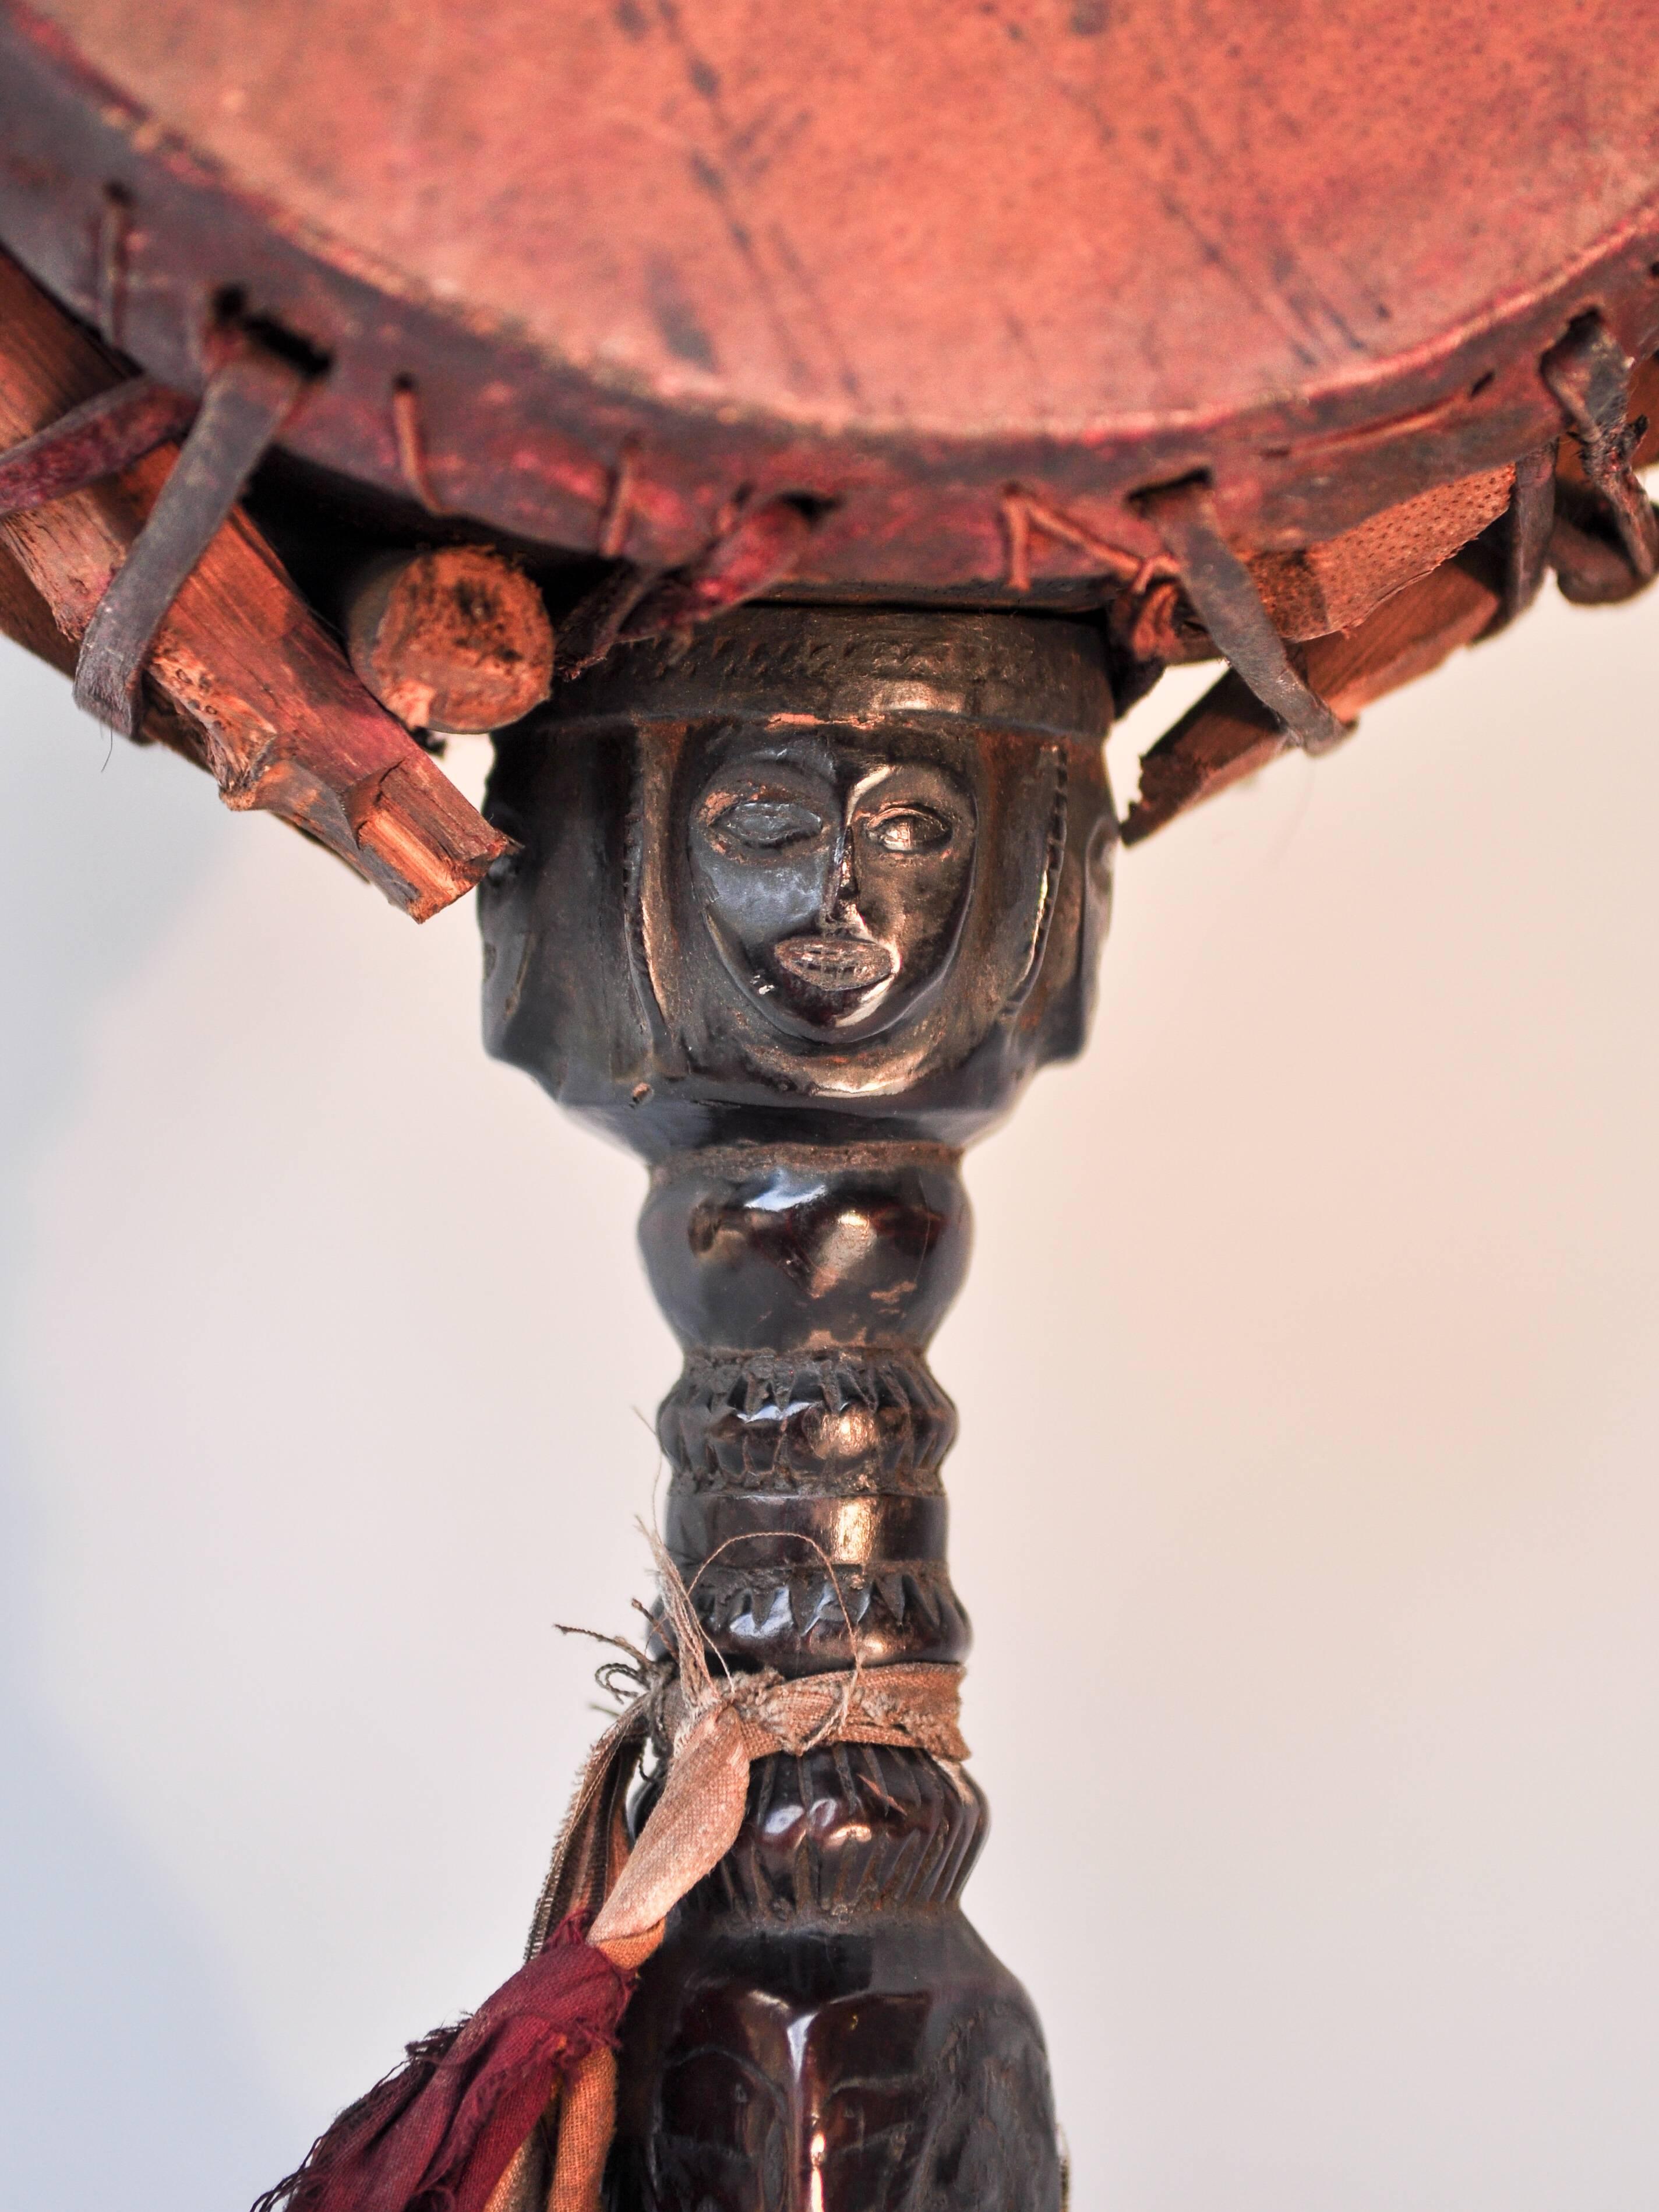 Nepalese Shaman Drum with Carved Wooden Handle, Nepal Himalaya, Mid-20th Century